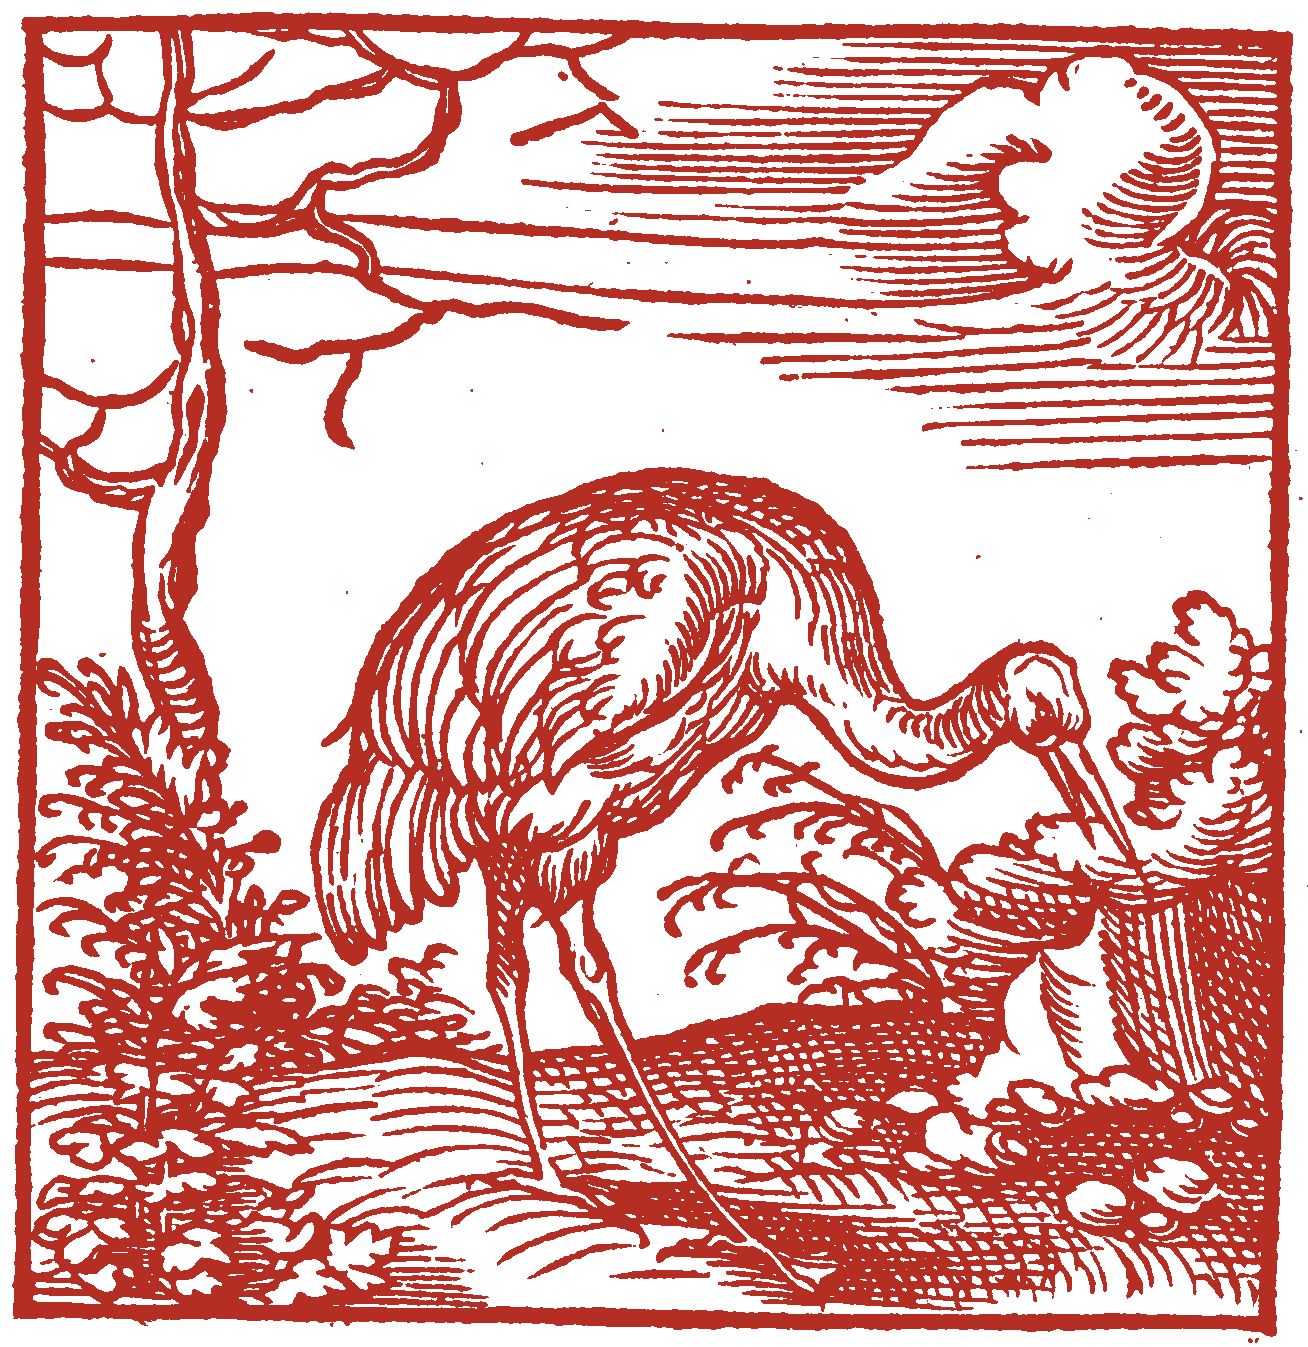 Red woodcut illustration of a crane bending down with beak open